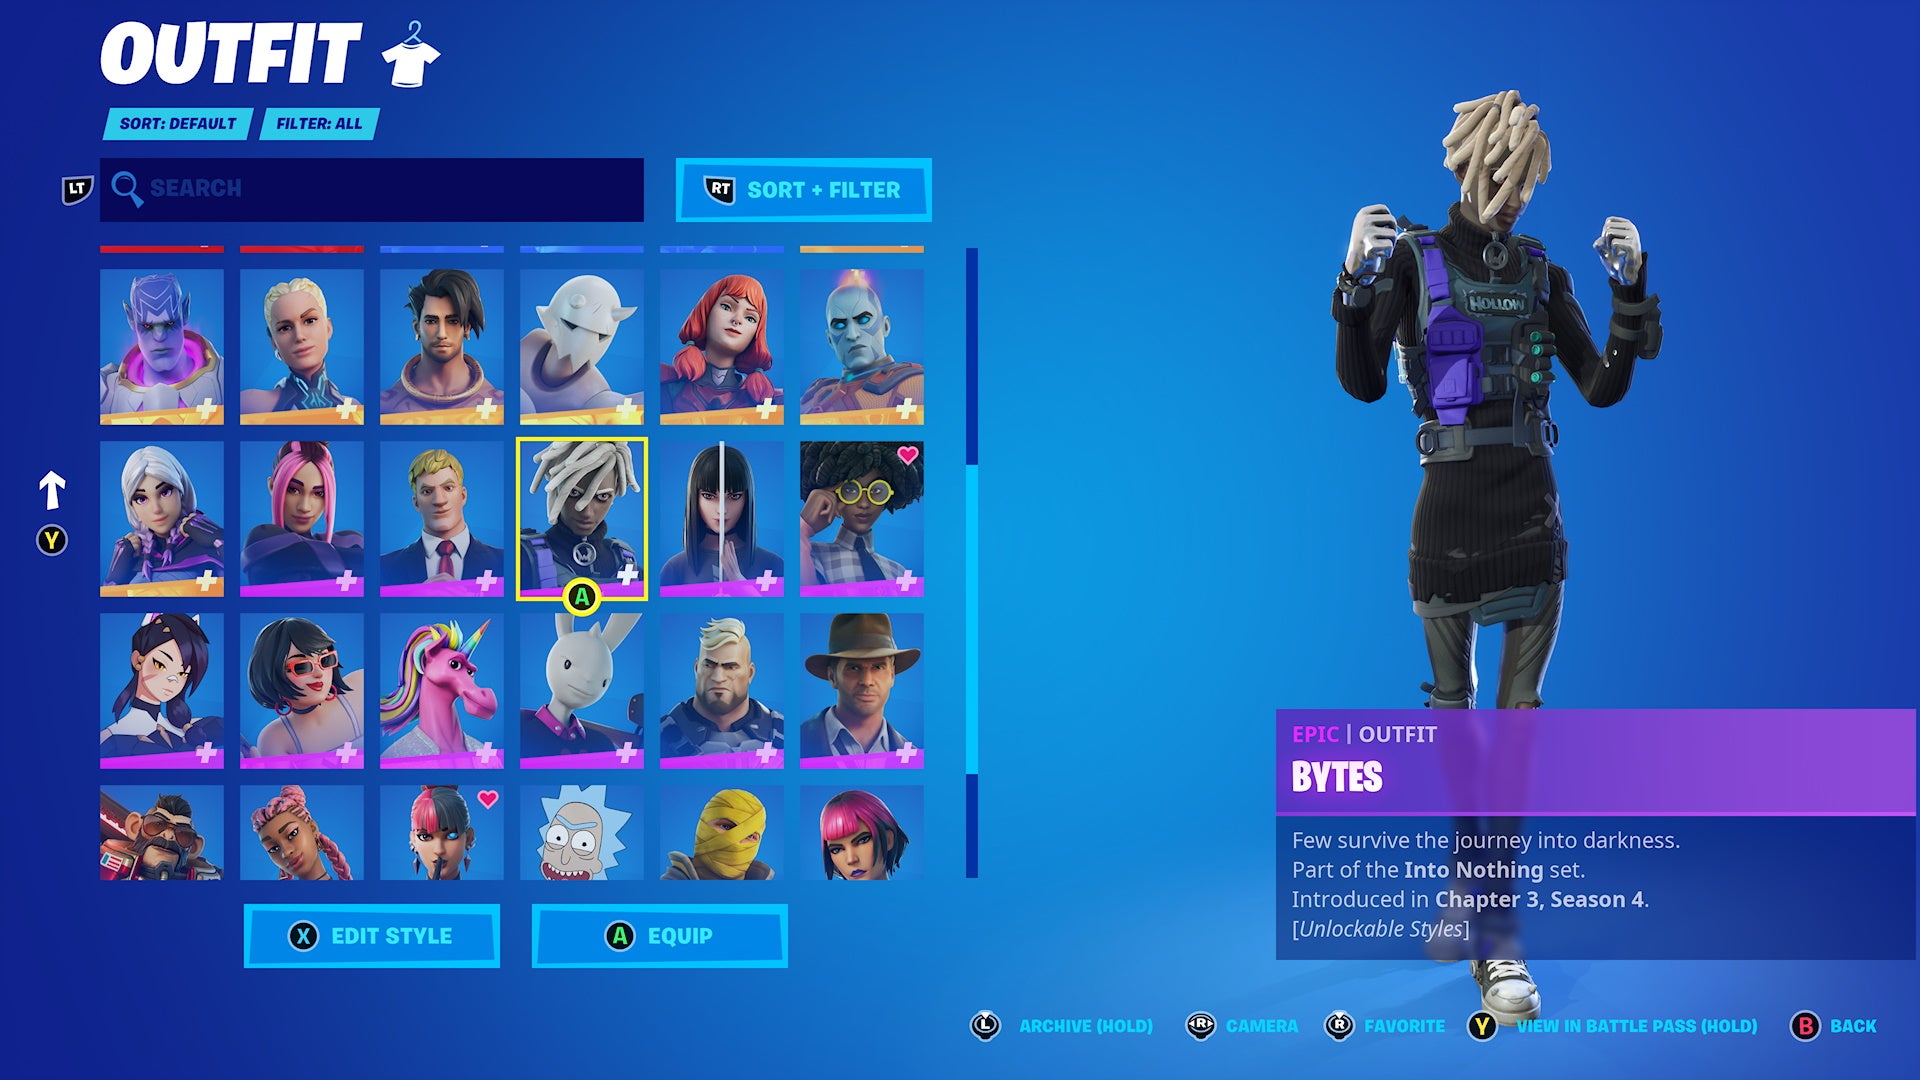 How to unlock the Bytes outfit in Fortnite 2